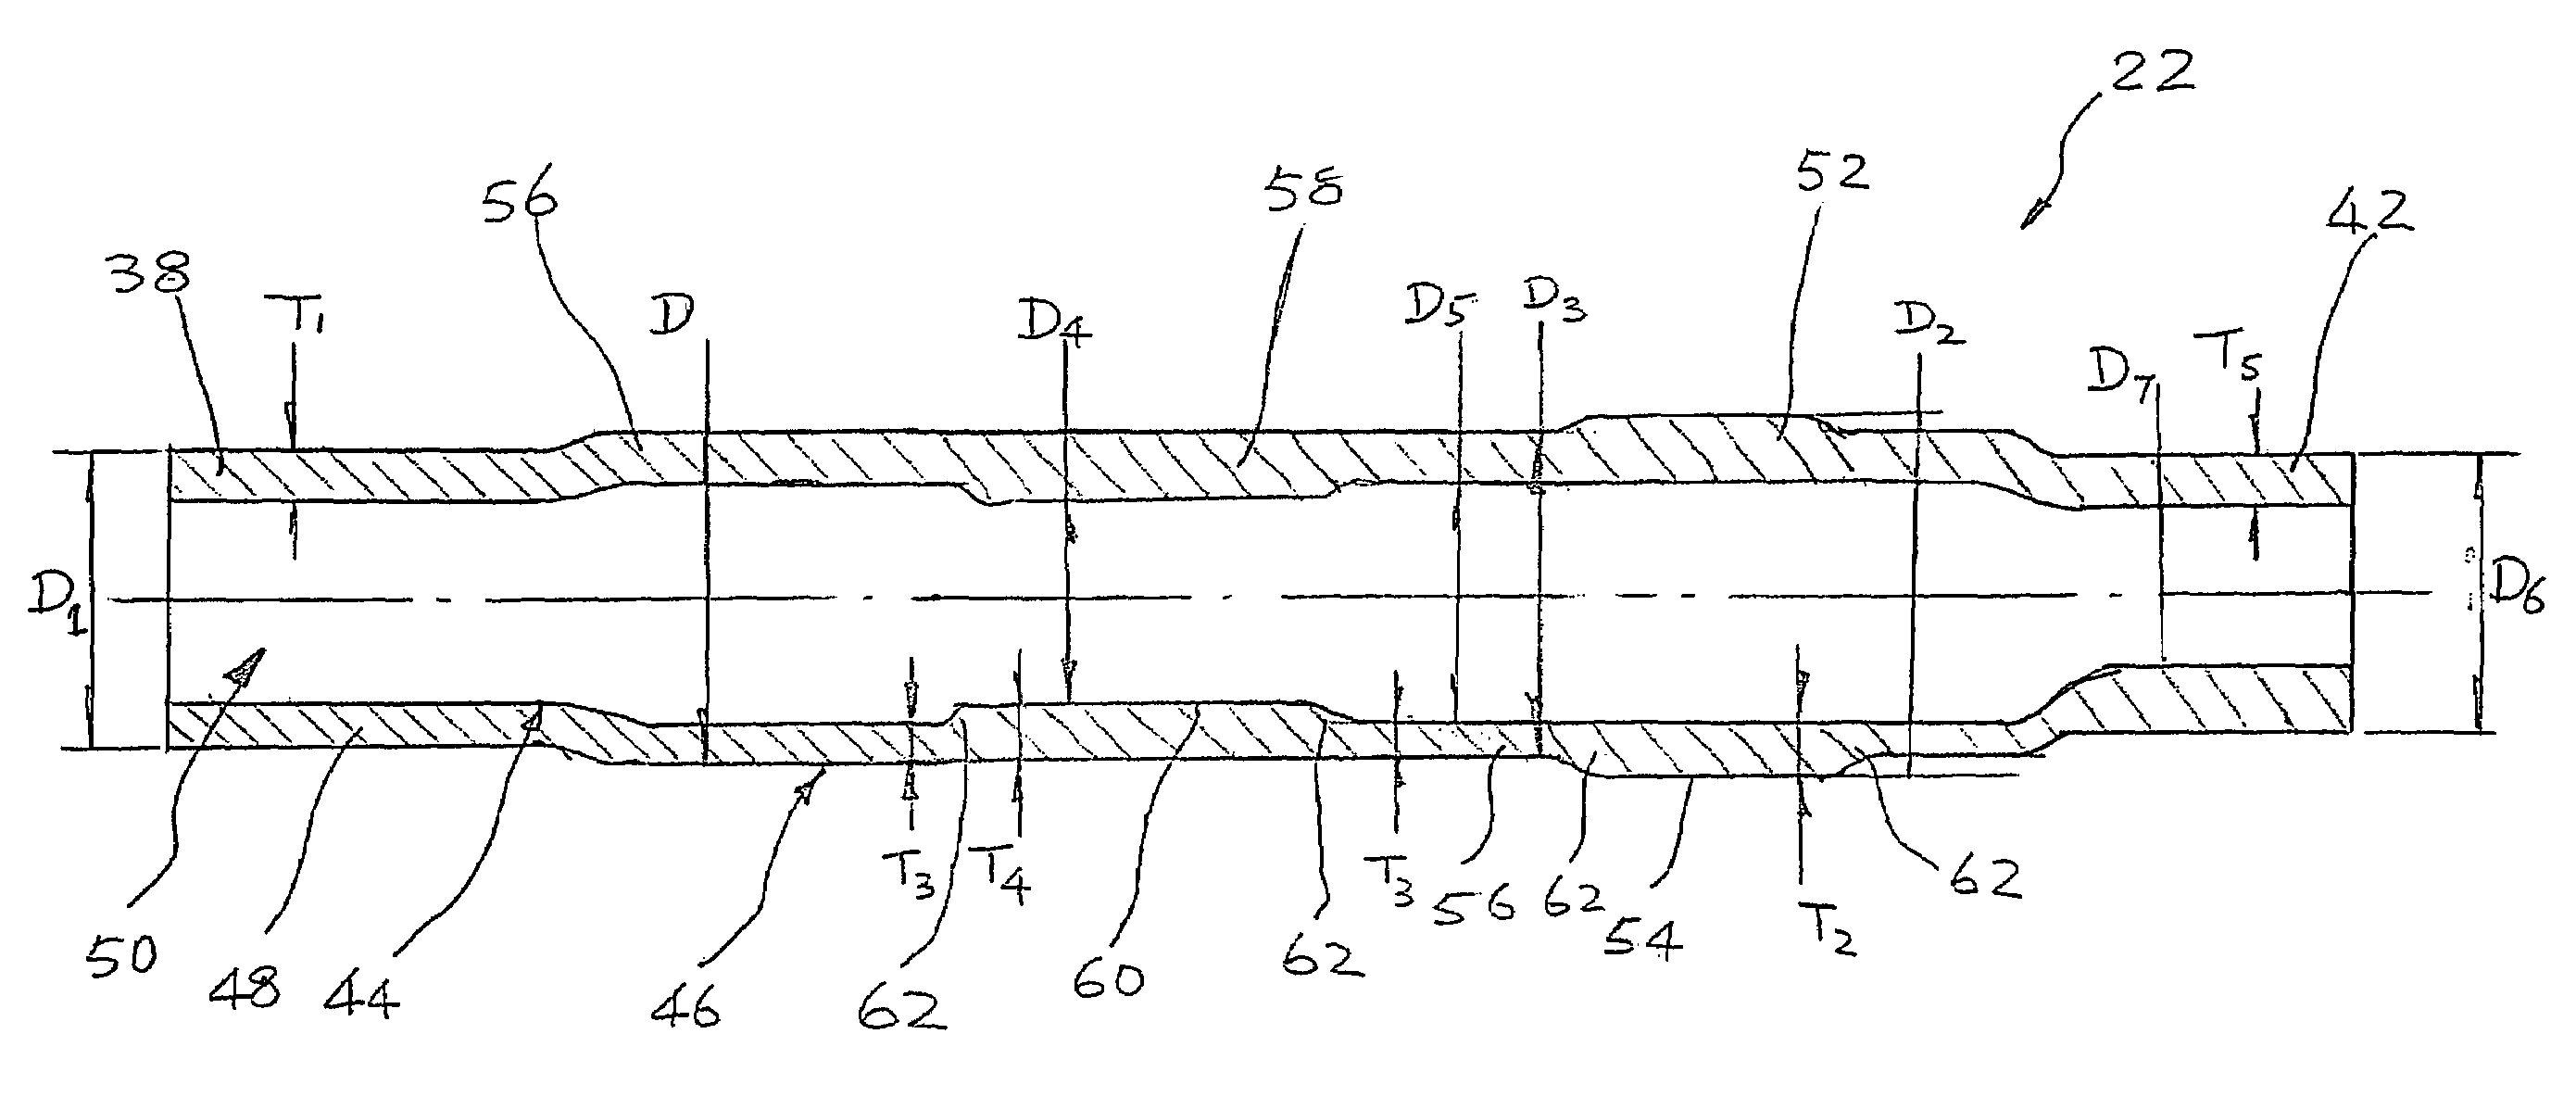 Tubular articles with varying wall thickness and method of manufacturing same